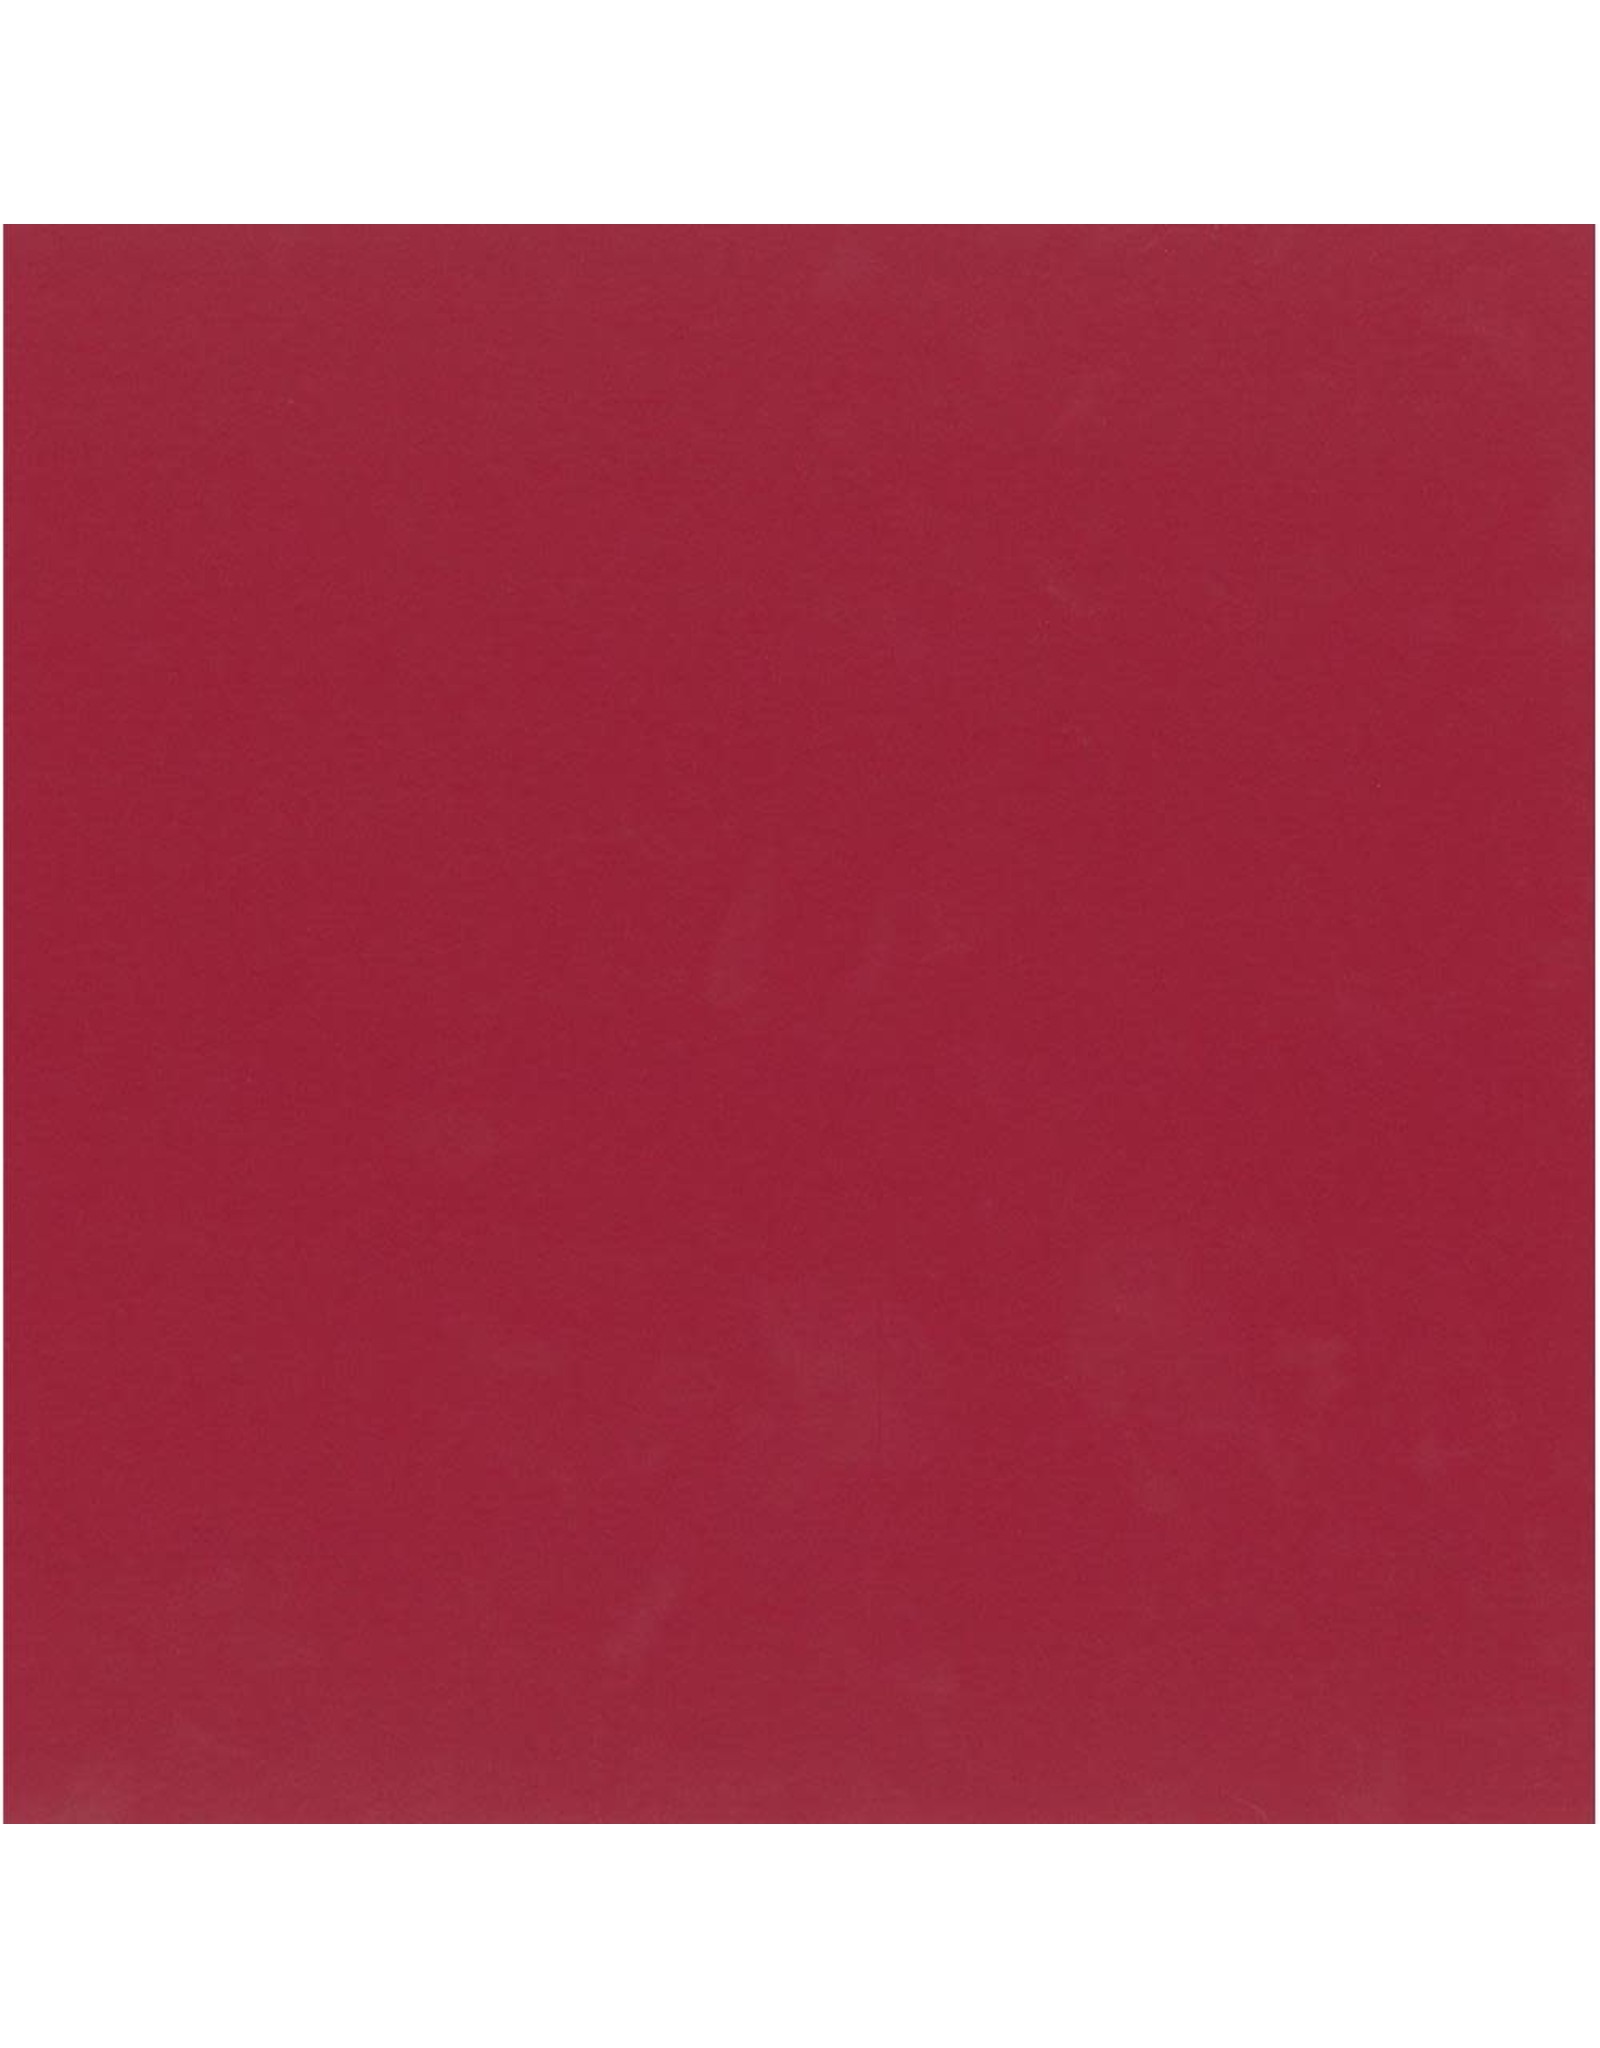 MY COLORS MY COLORS CLASSIC 80 LB COVER WEIGHT POMEGRANATE 12x12 CARDSTOCK